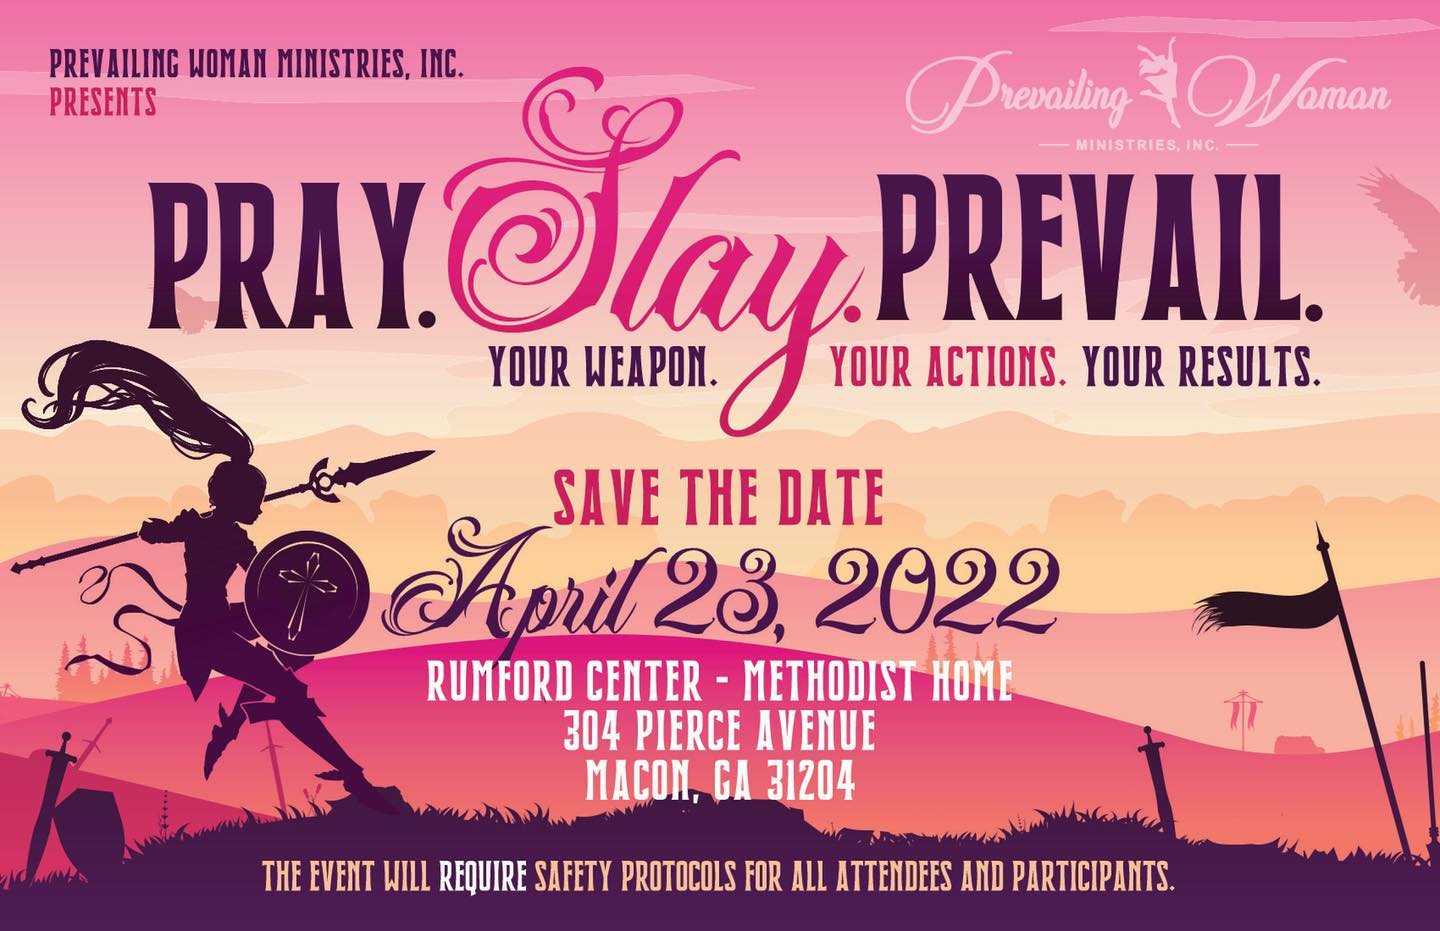 More details coming soon.  #prevailingwomanministries #pwmconference2022 #prayslayprevail #aprevailingwoman